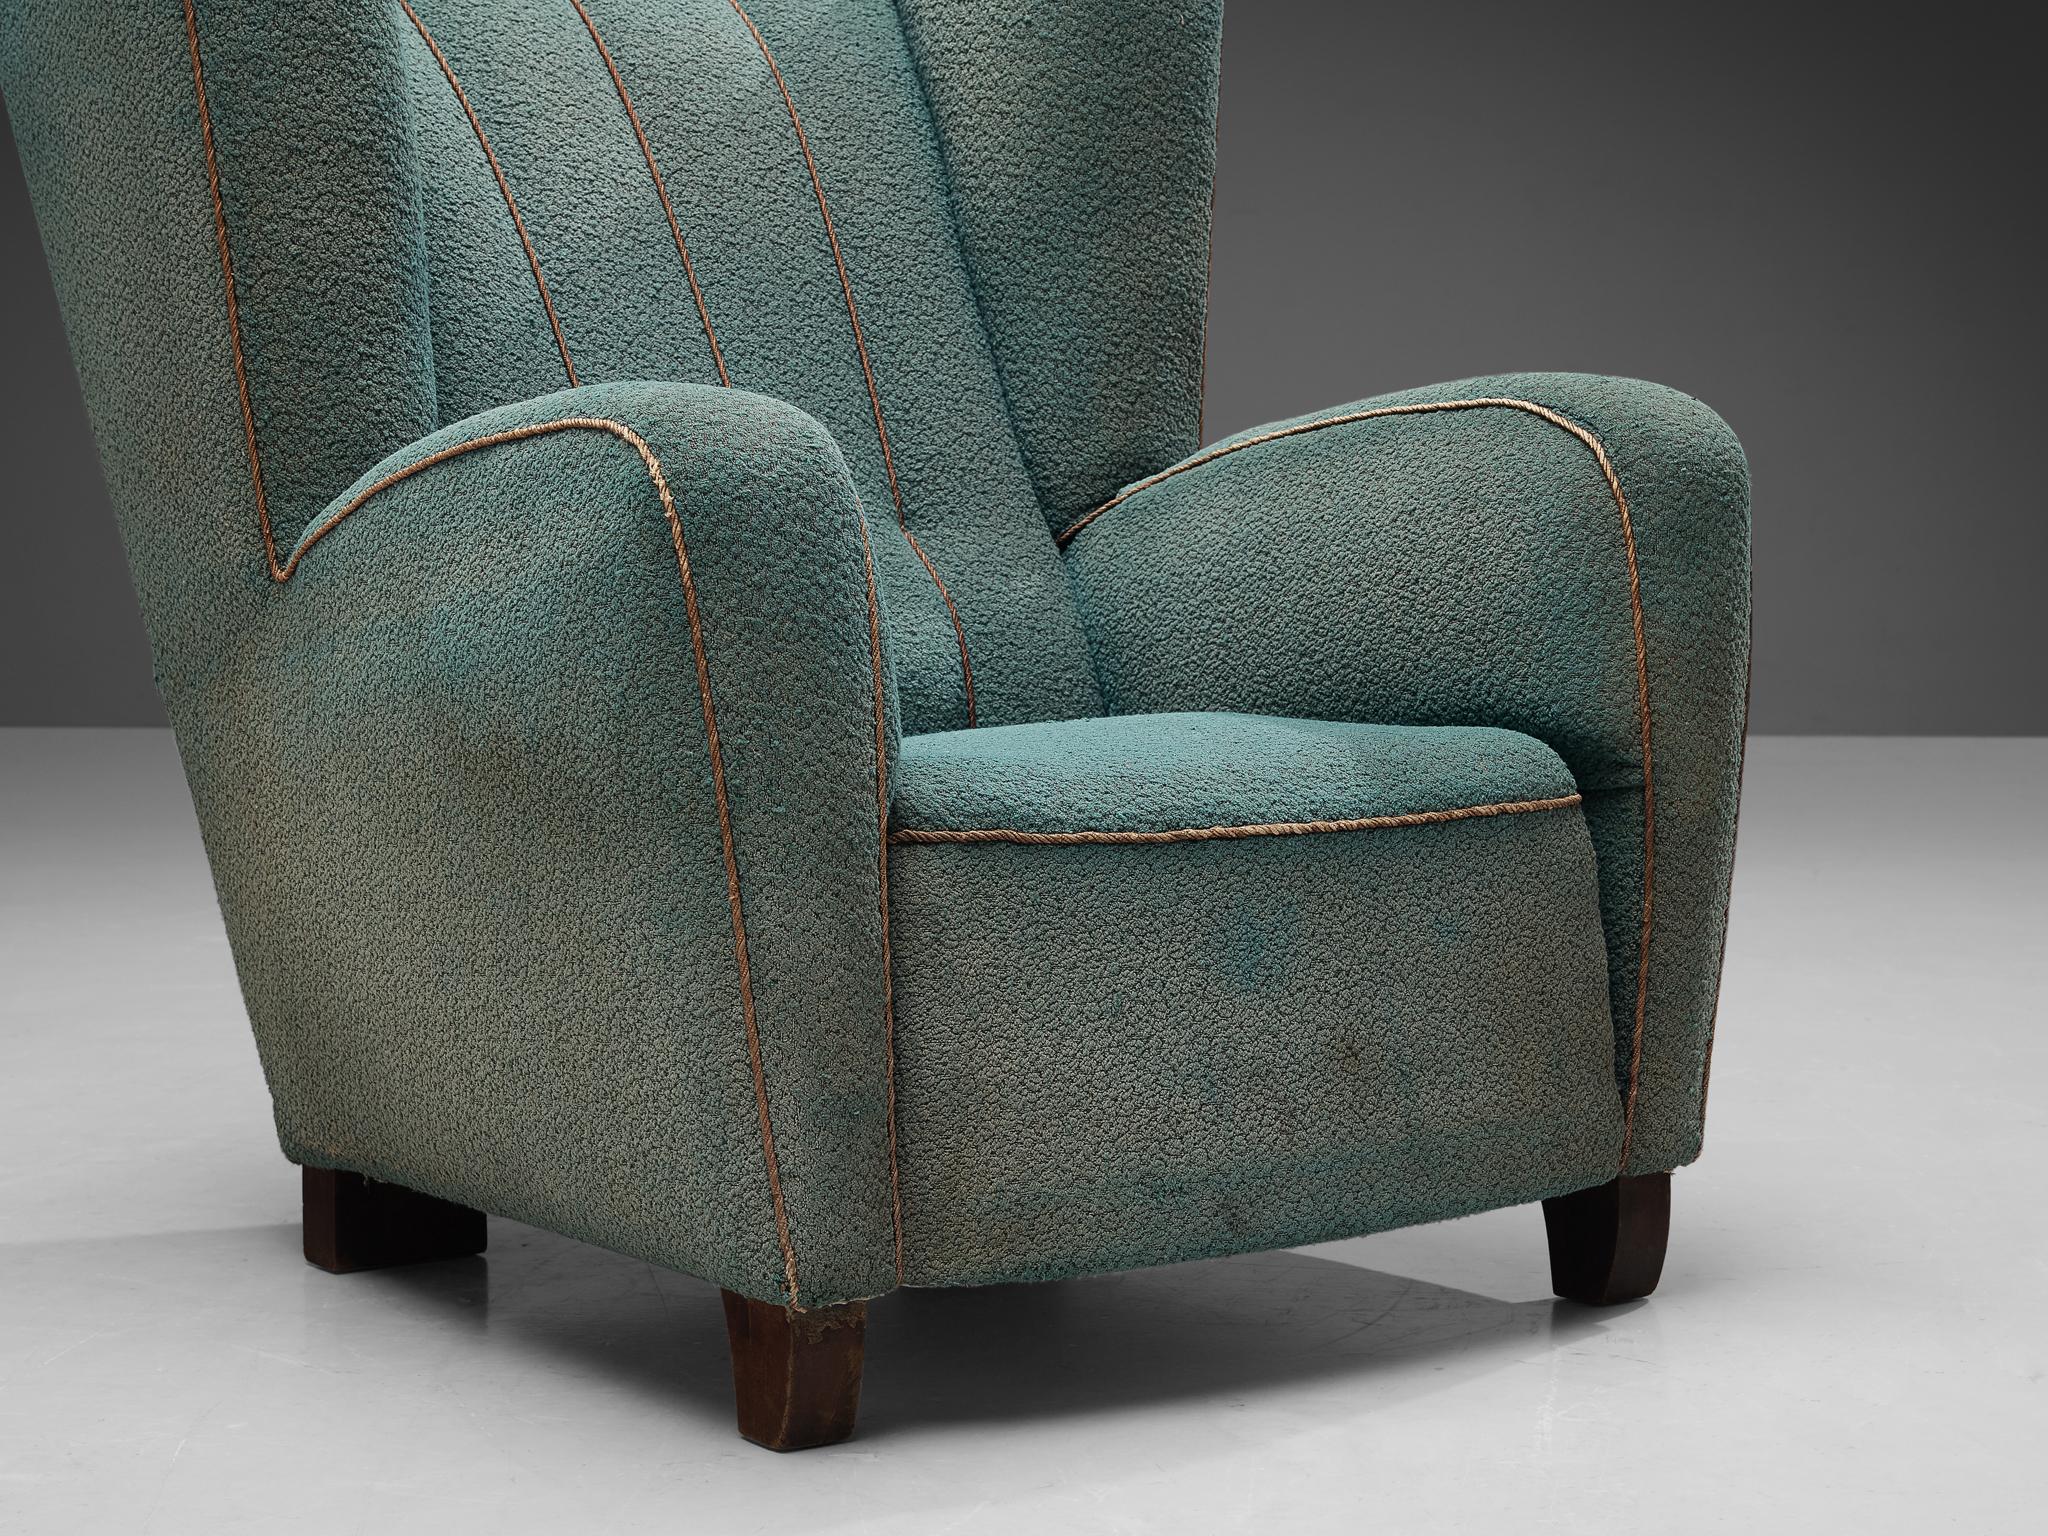 Mid-20th Century Scandinavian Wingback Chair in Ocean Blue Upholstery For Sale